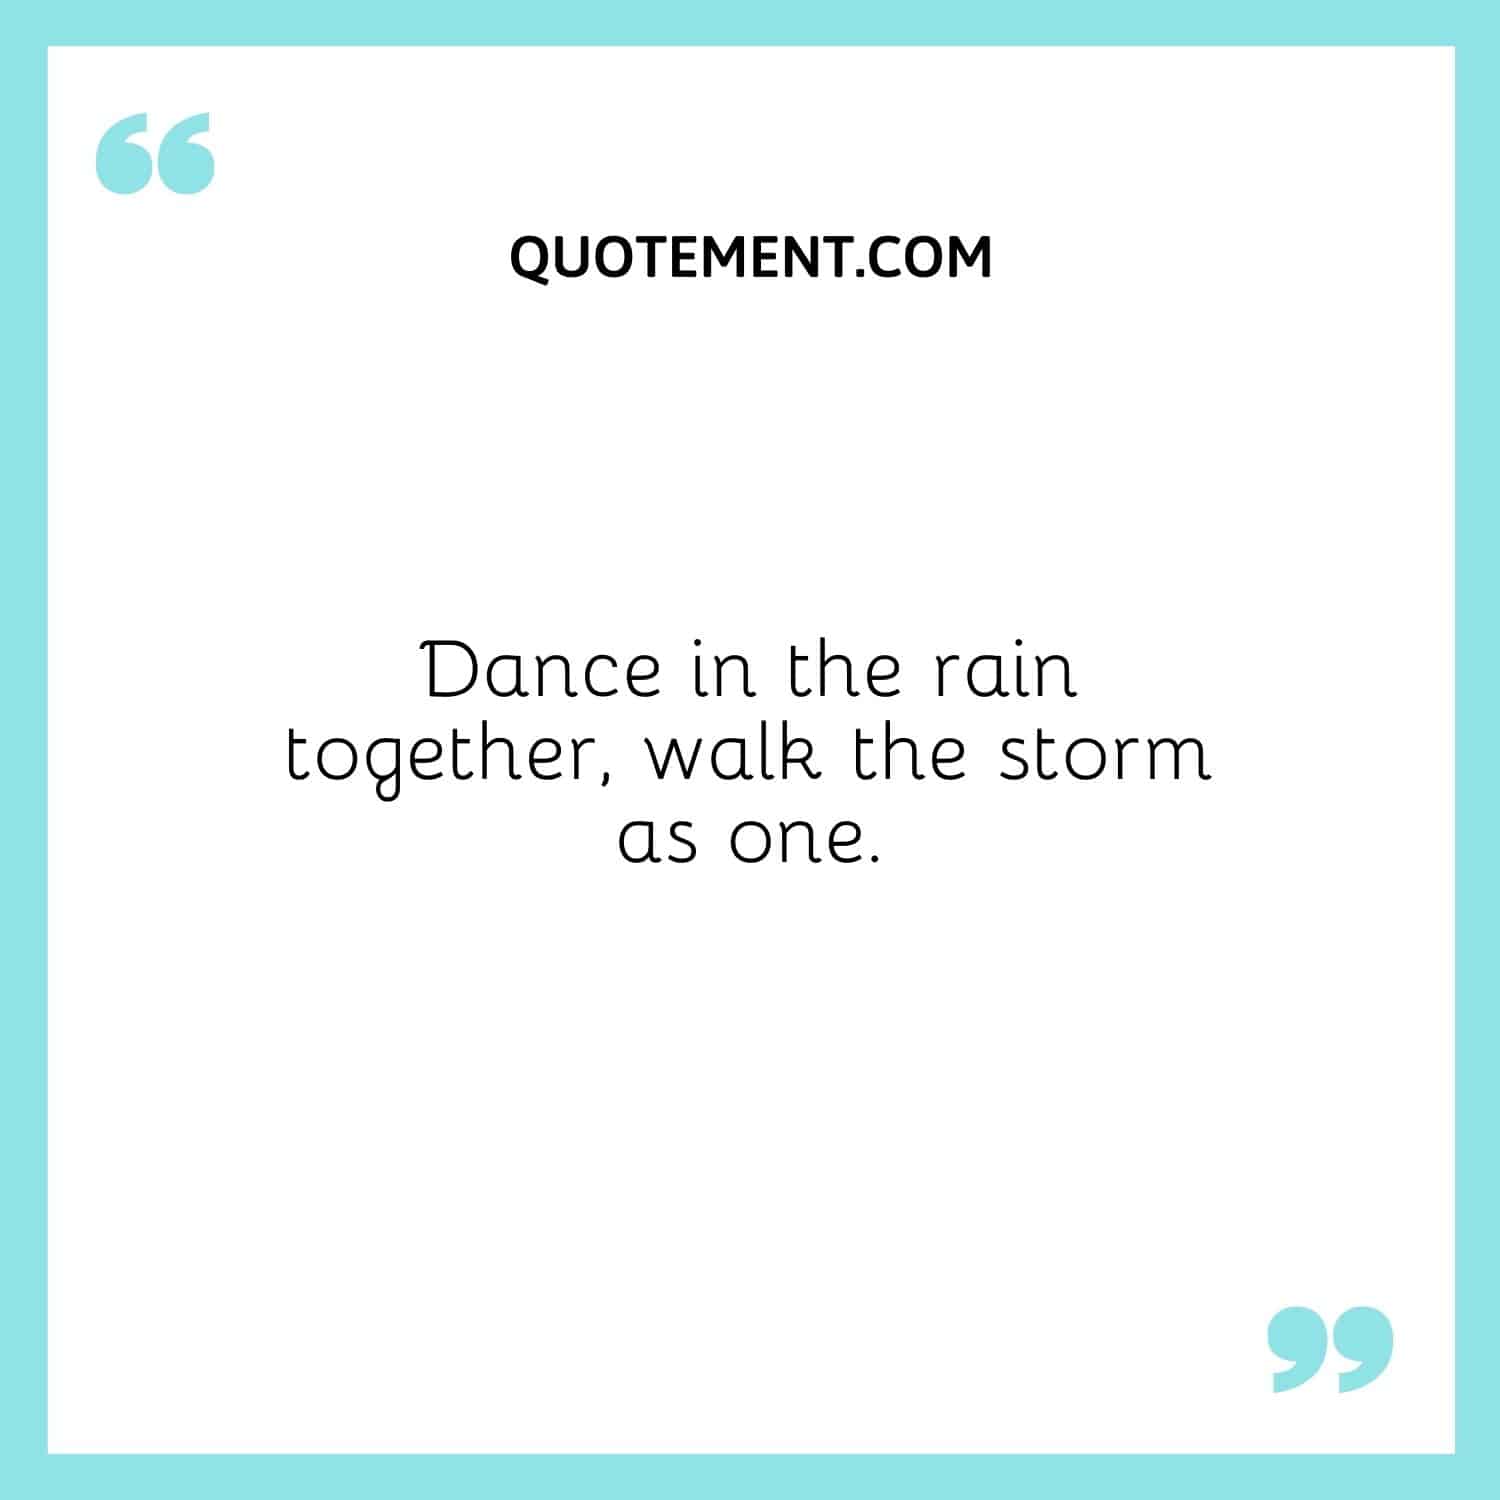 Dance in the rain together, walk the storm as one.